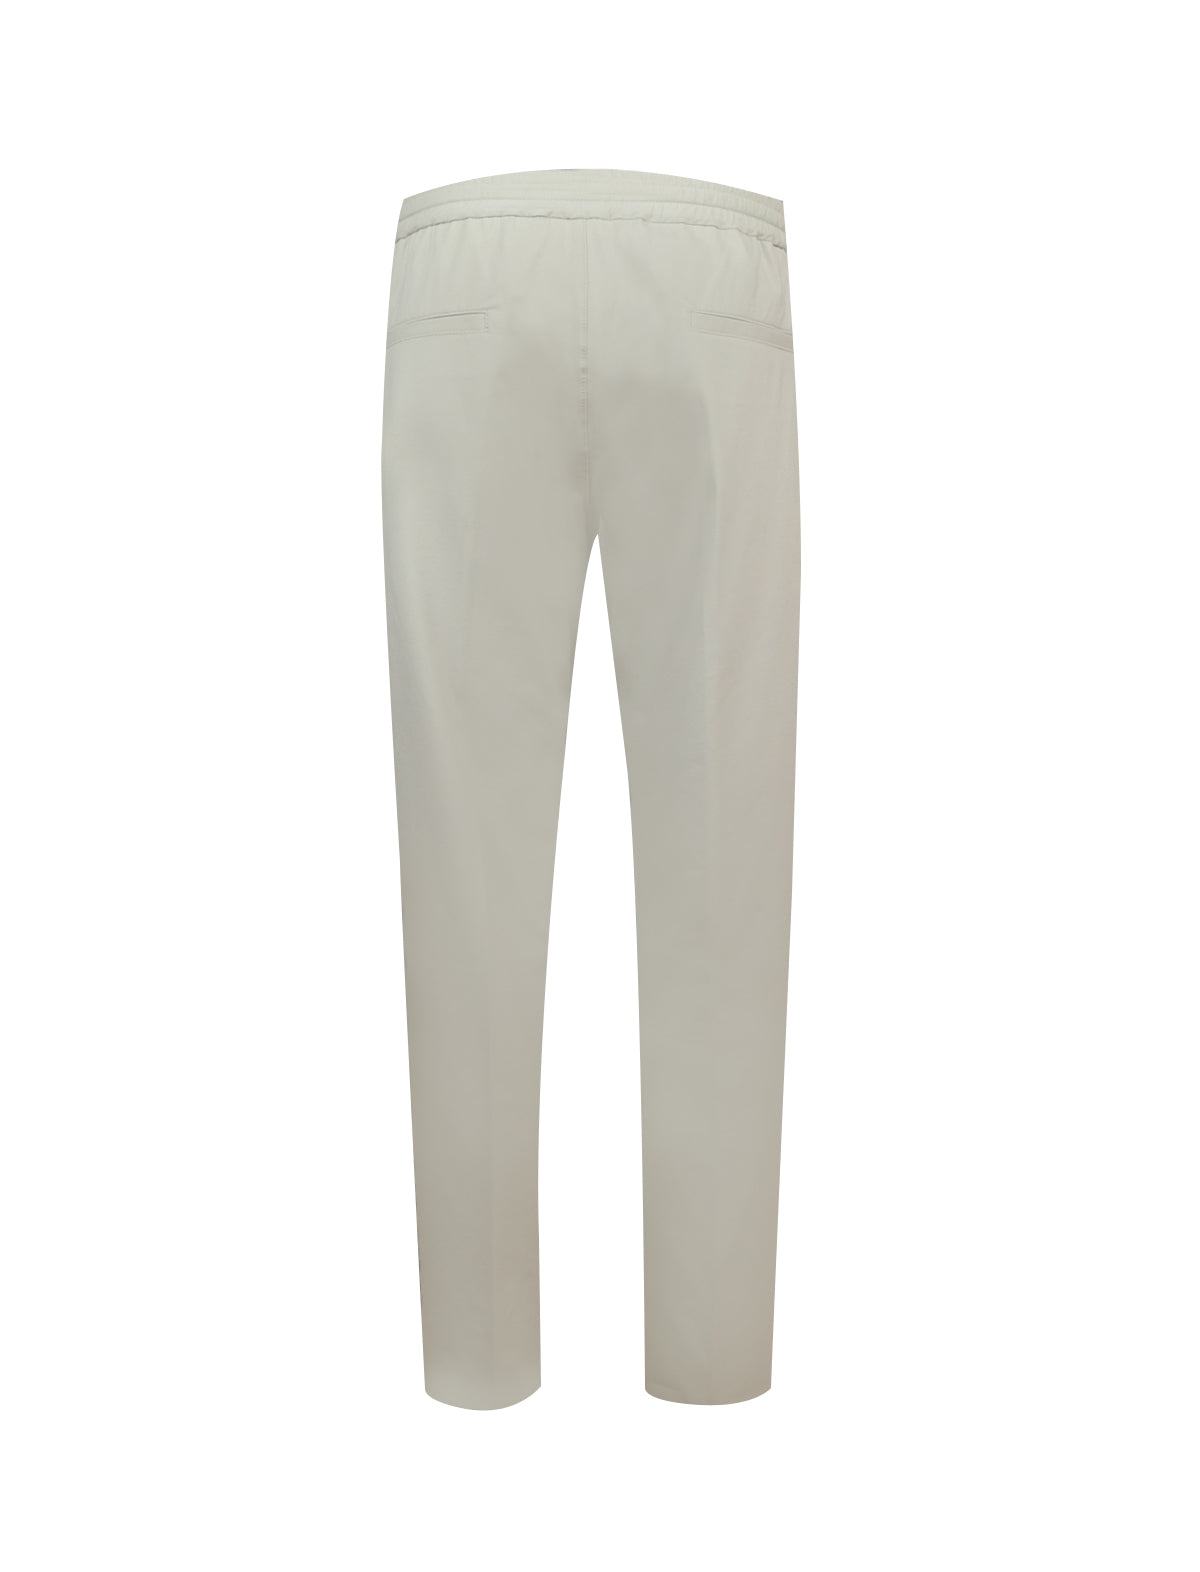 CIRCOLO 1901 Jersey Jogger Pants in Beige